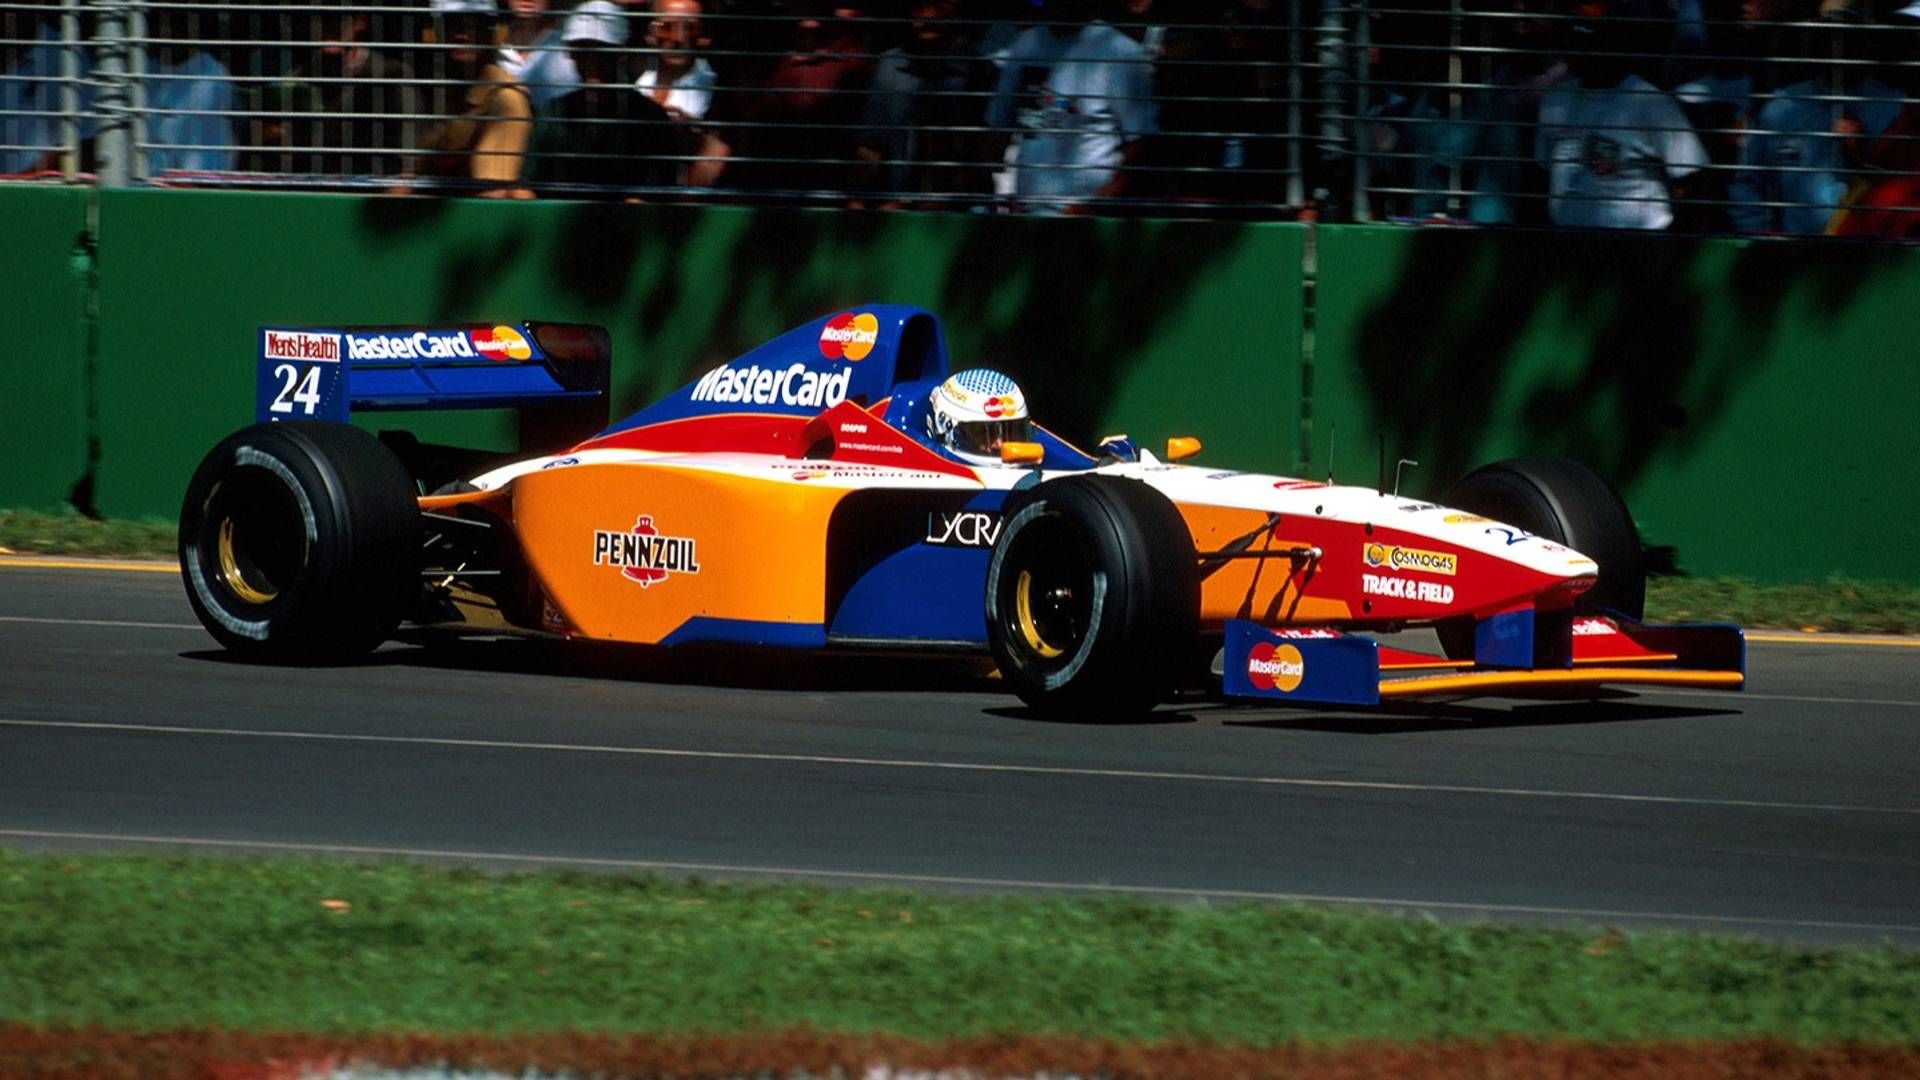 The MasterCard Lola was one of the worst F1 teams.